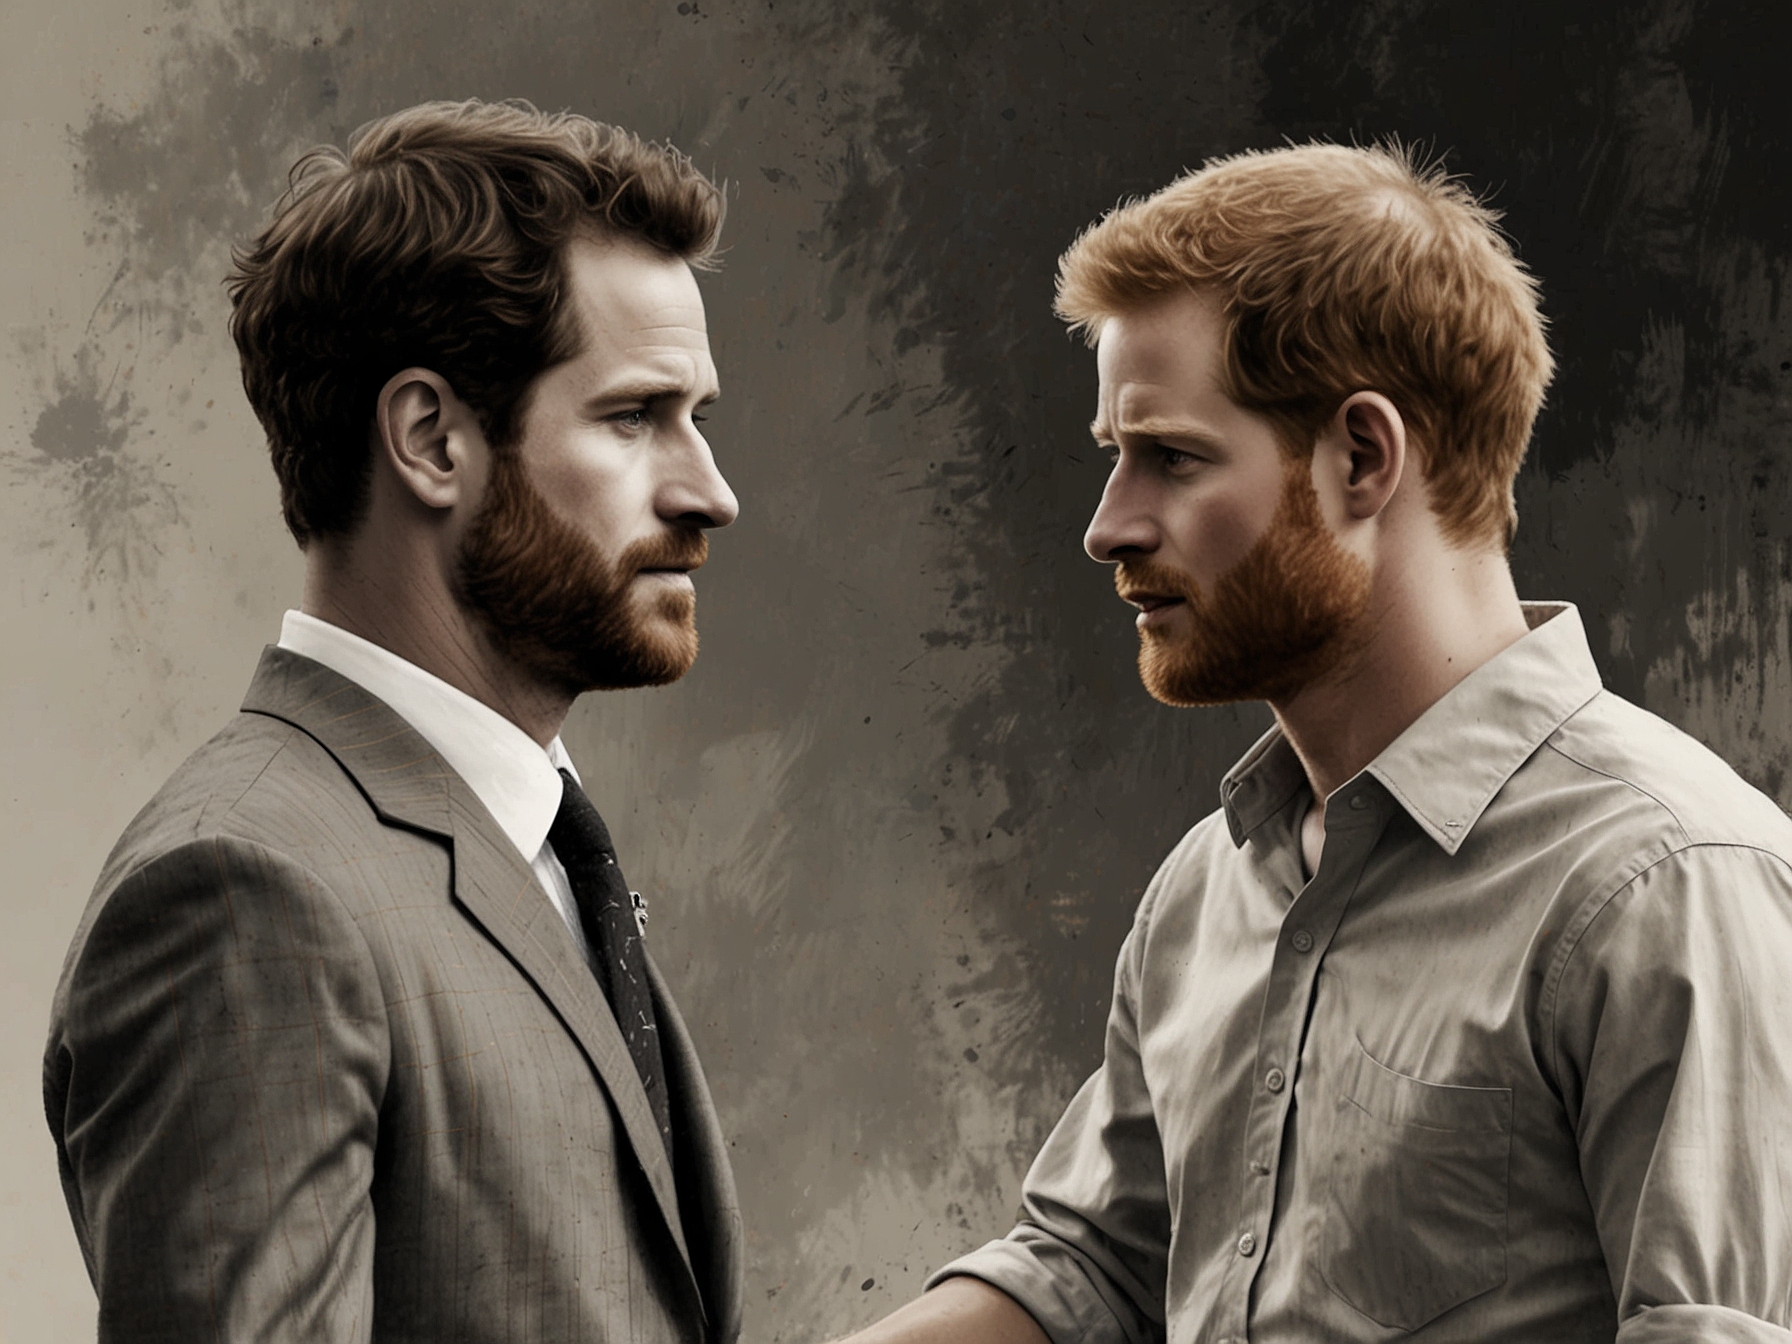 King Charles and Prince Harry seen during a solemn exchange, indicative of their attempt to heal past wounds and rebuild their father-son relationship despite ongoing difficulties.